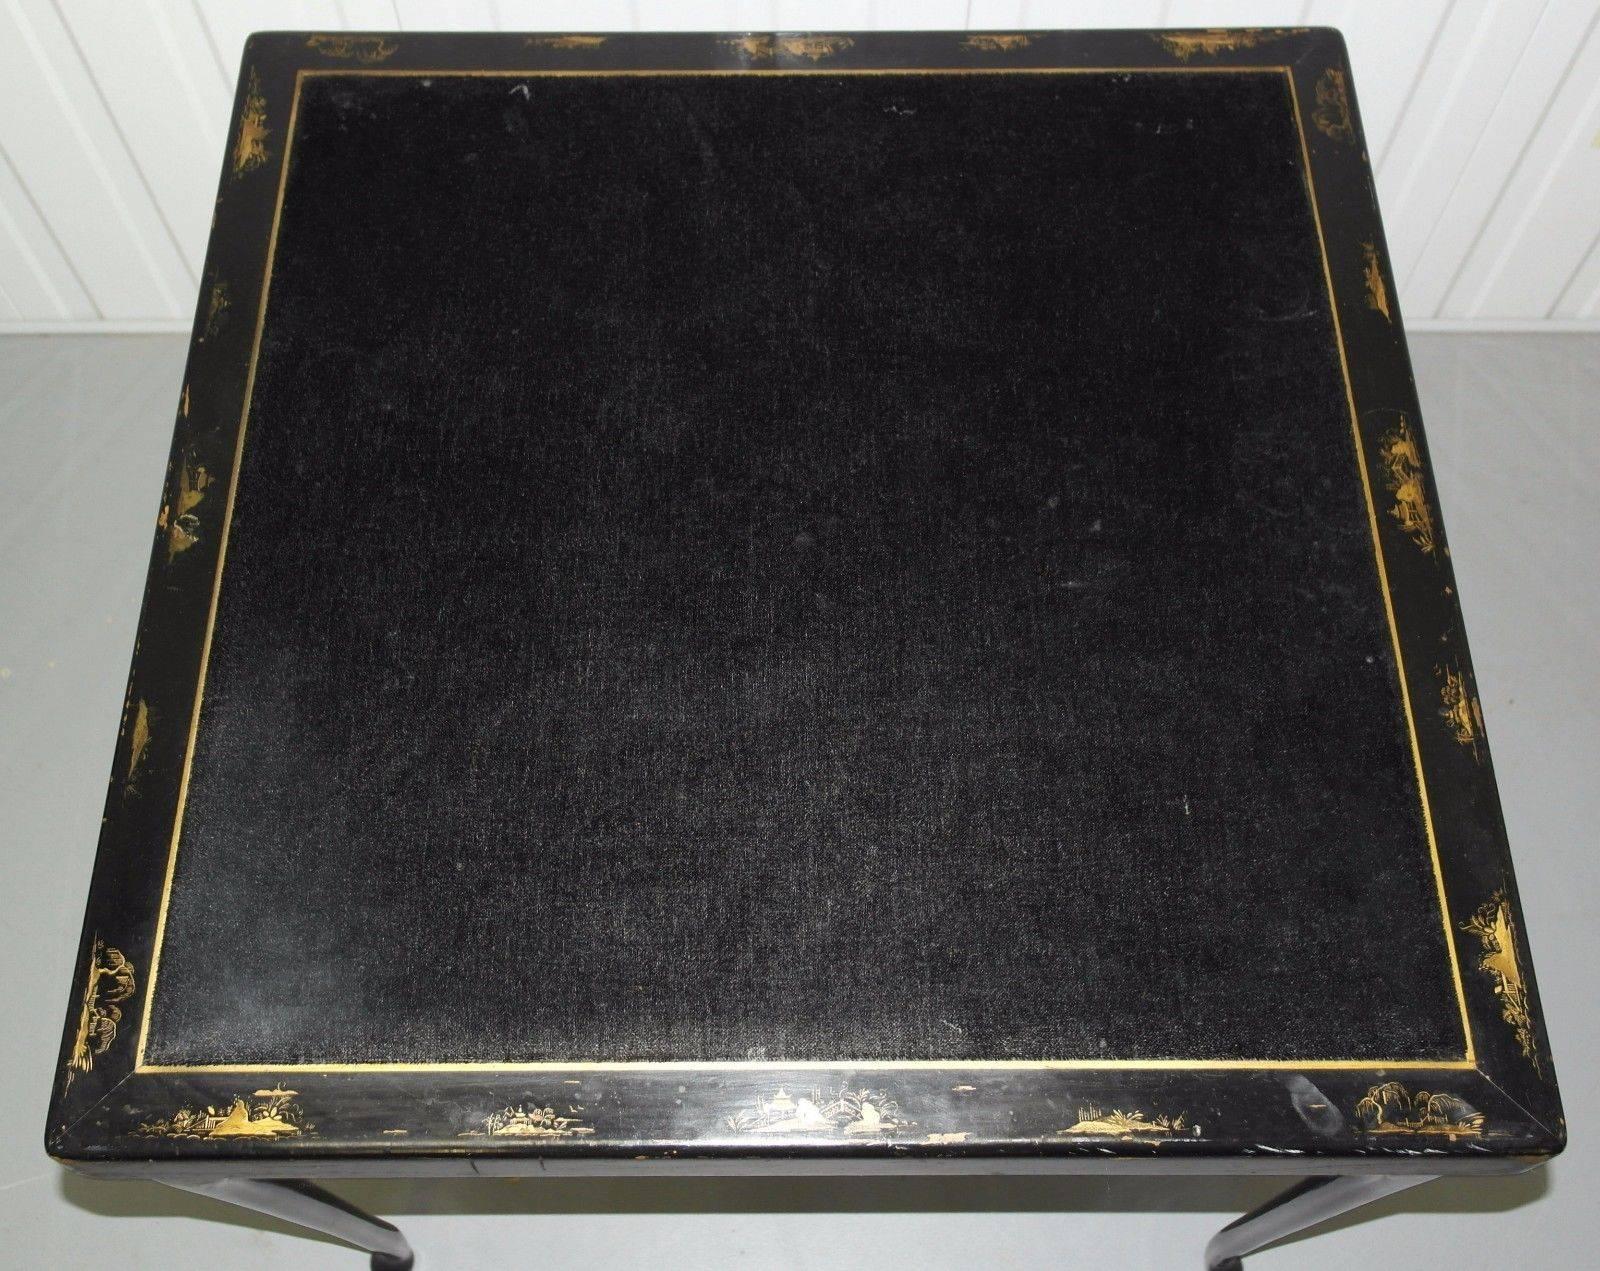 Chinese Export Pair of Antique Chinoiserie Campaign English Made Folding Card Tables Chinese